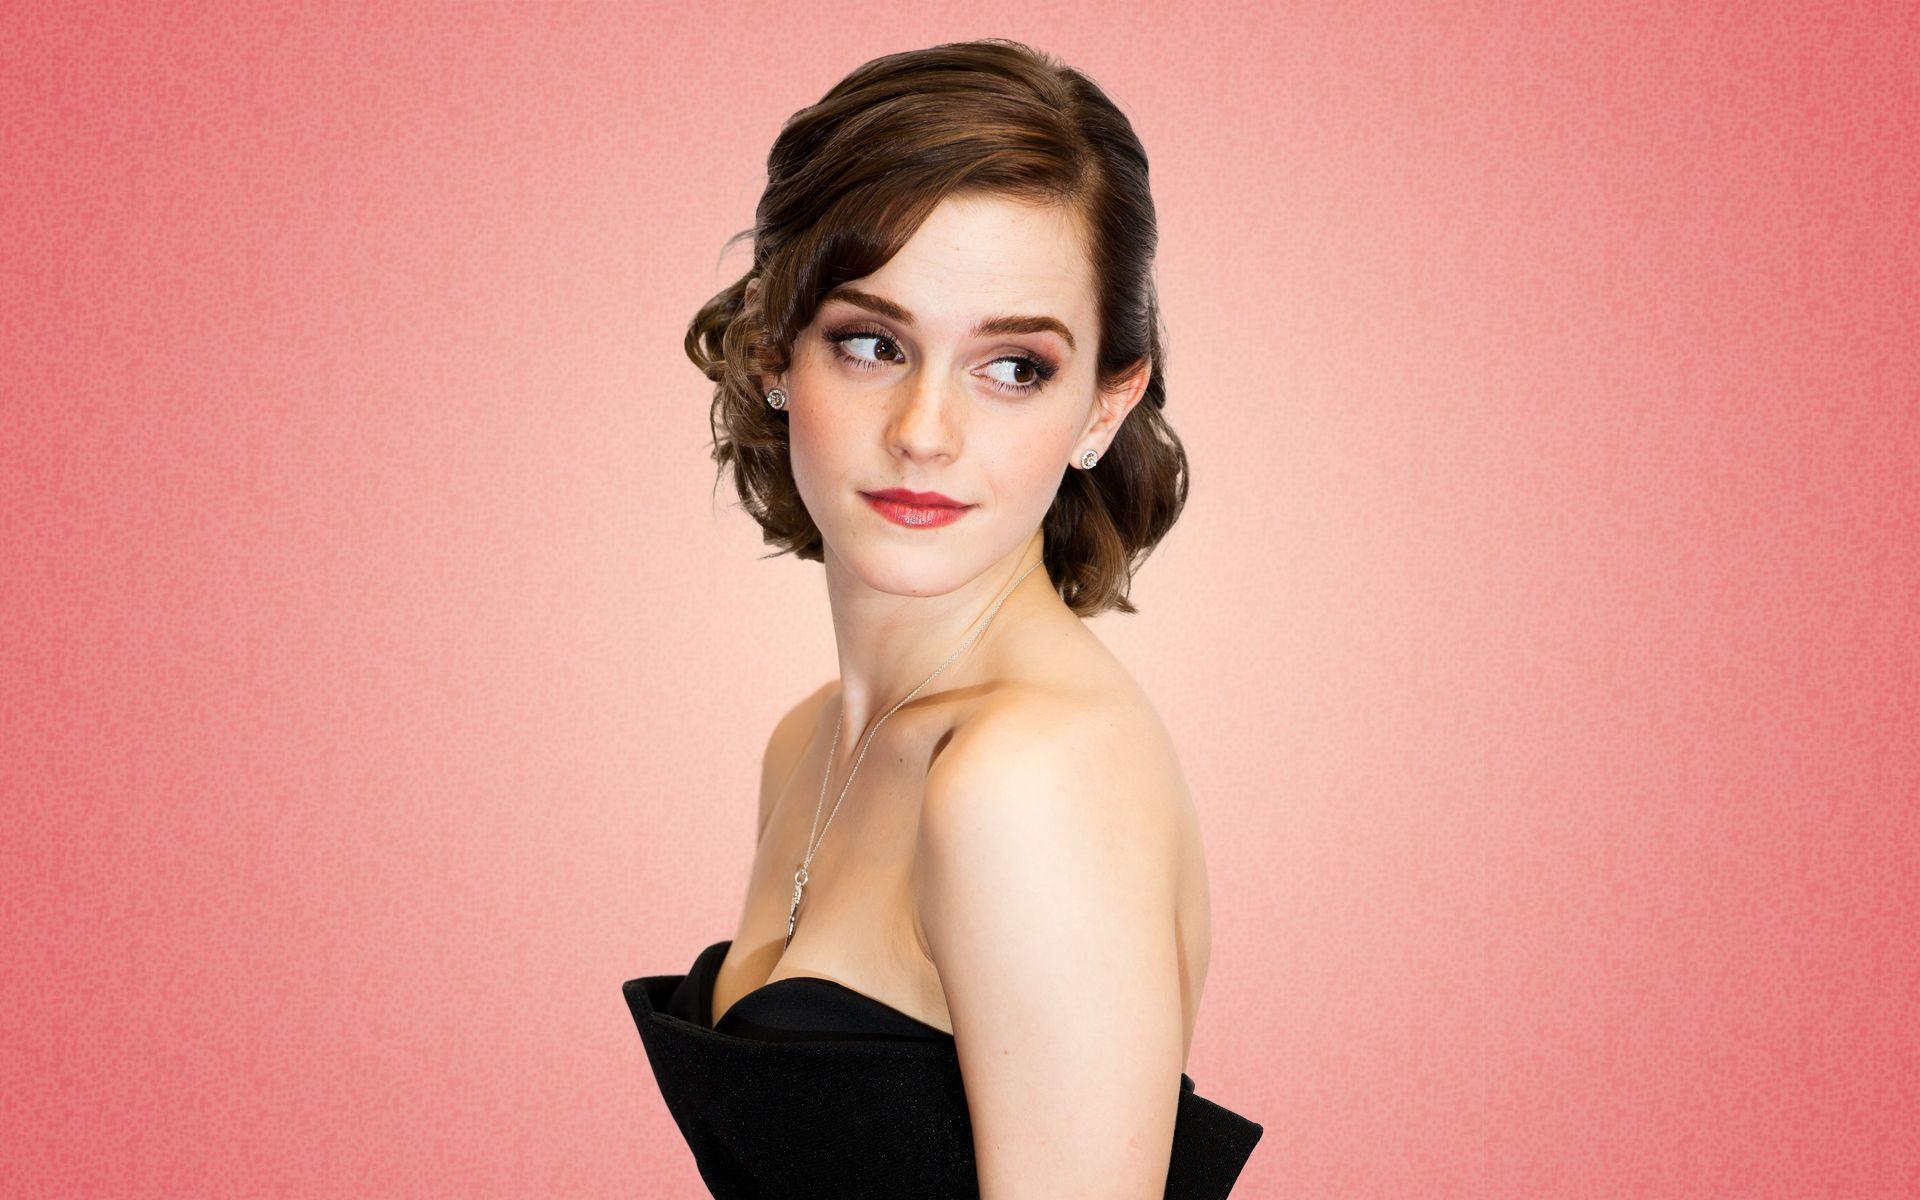 Emma Watson Perks of Being a Wallflower. HD Hollywood Actresses